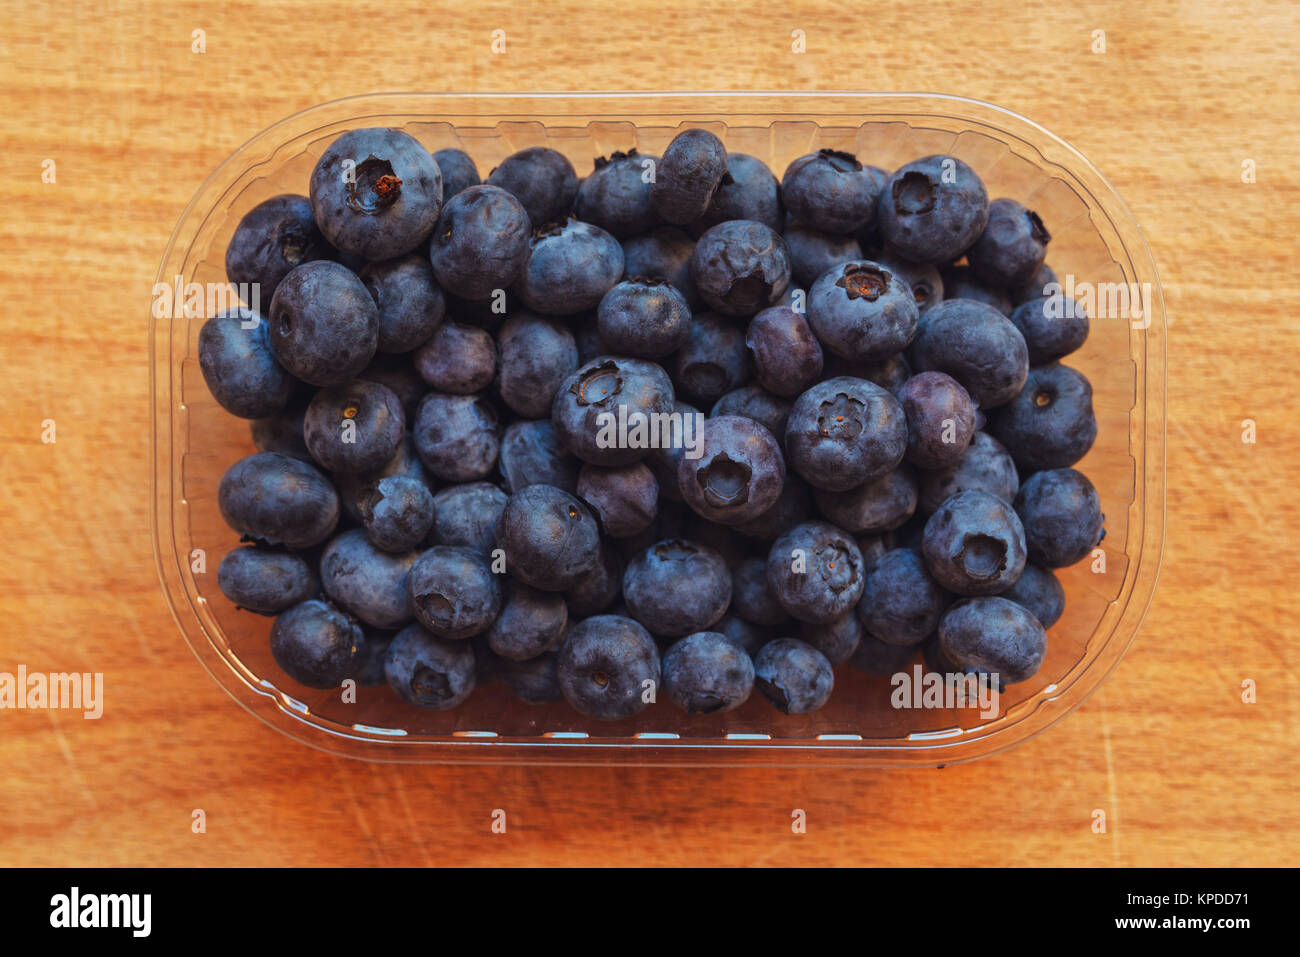 Blueberries myrtilles in plastic container box on wooden table Stock Photo